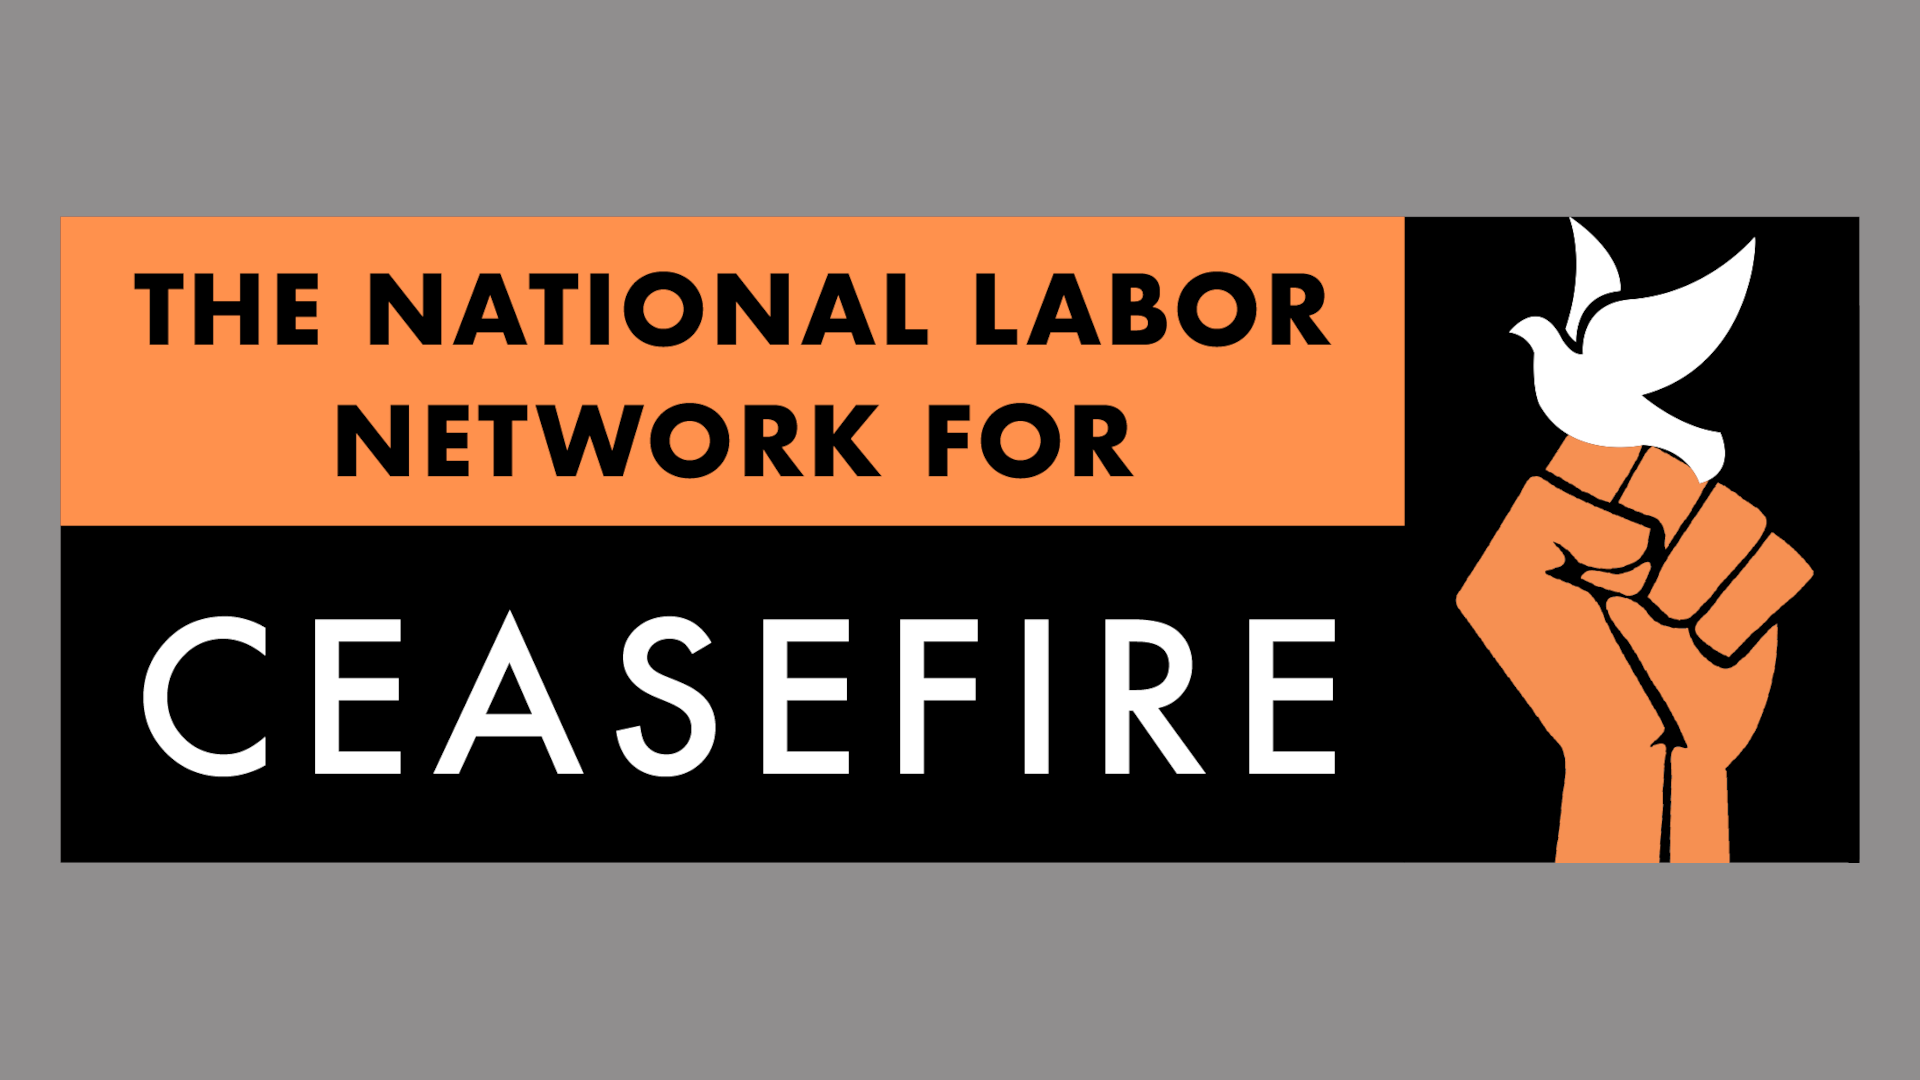 Unions Representing Over 9 Million Workers form the National Labor Network for Ceasefire